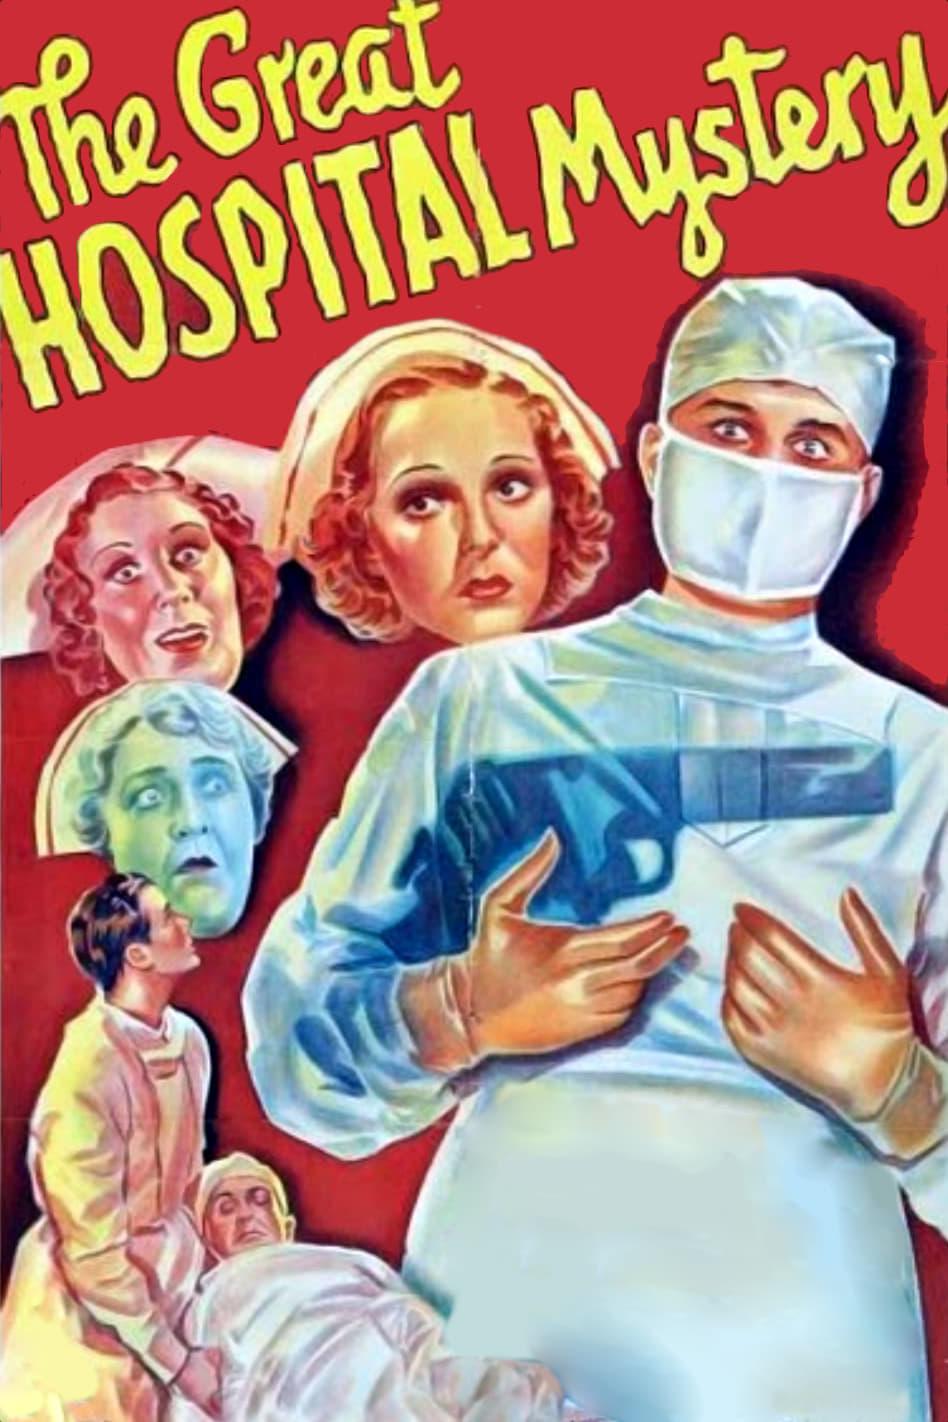 The Great Hospital Mystery poster